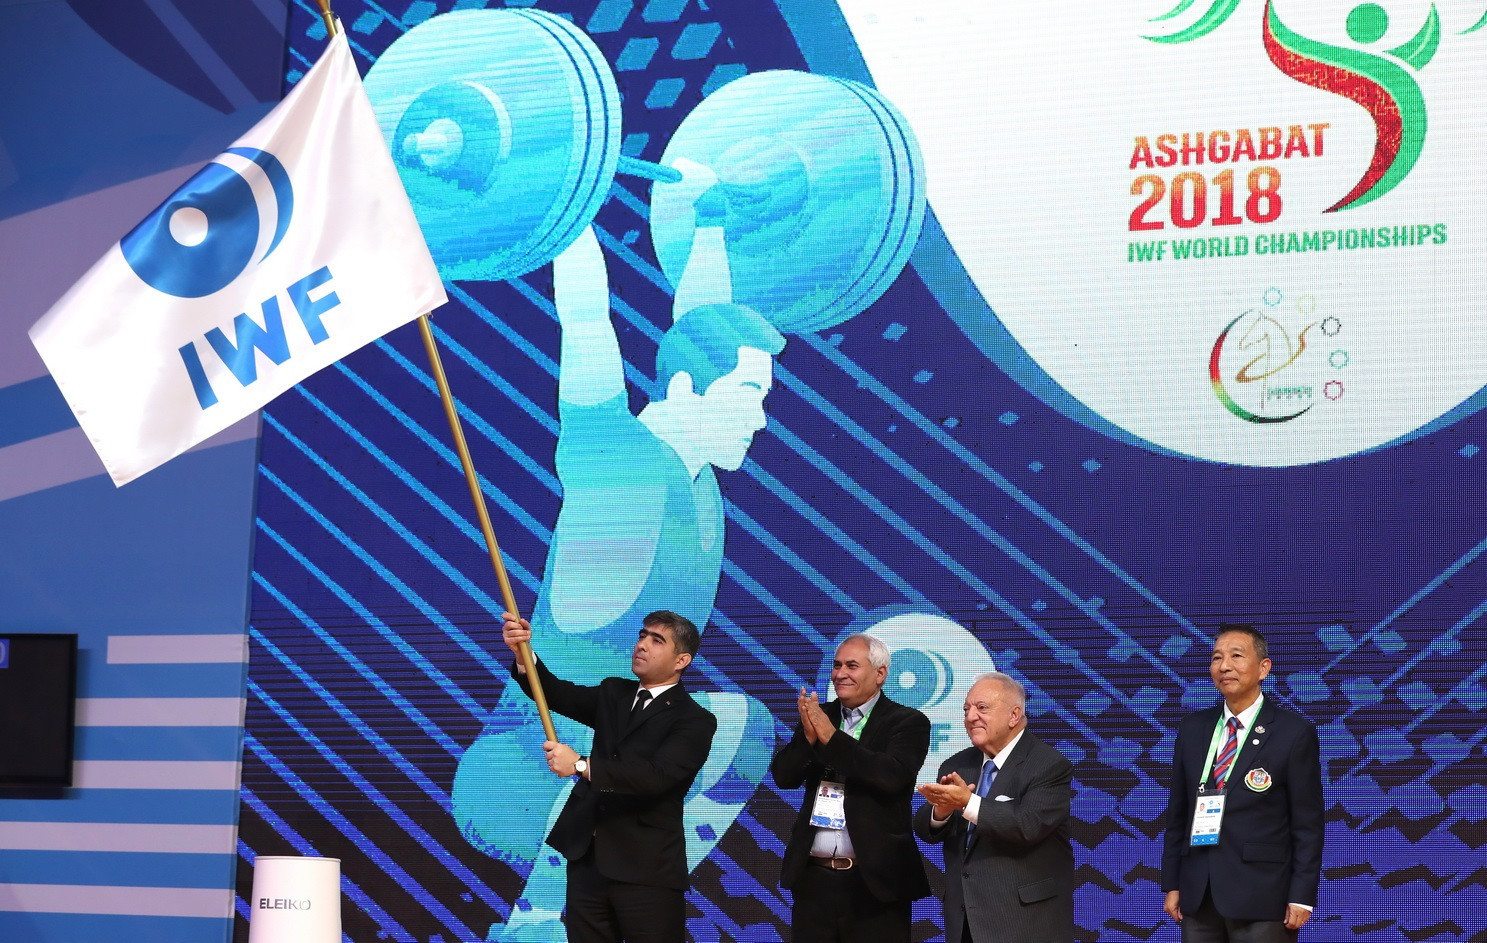 The IWF flag was passed from Ashgabat to Pattaya, hosts of the 2019 World Championships, following the conclusion of competition ©IWF